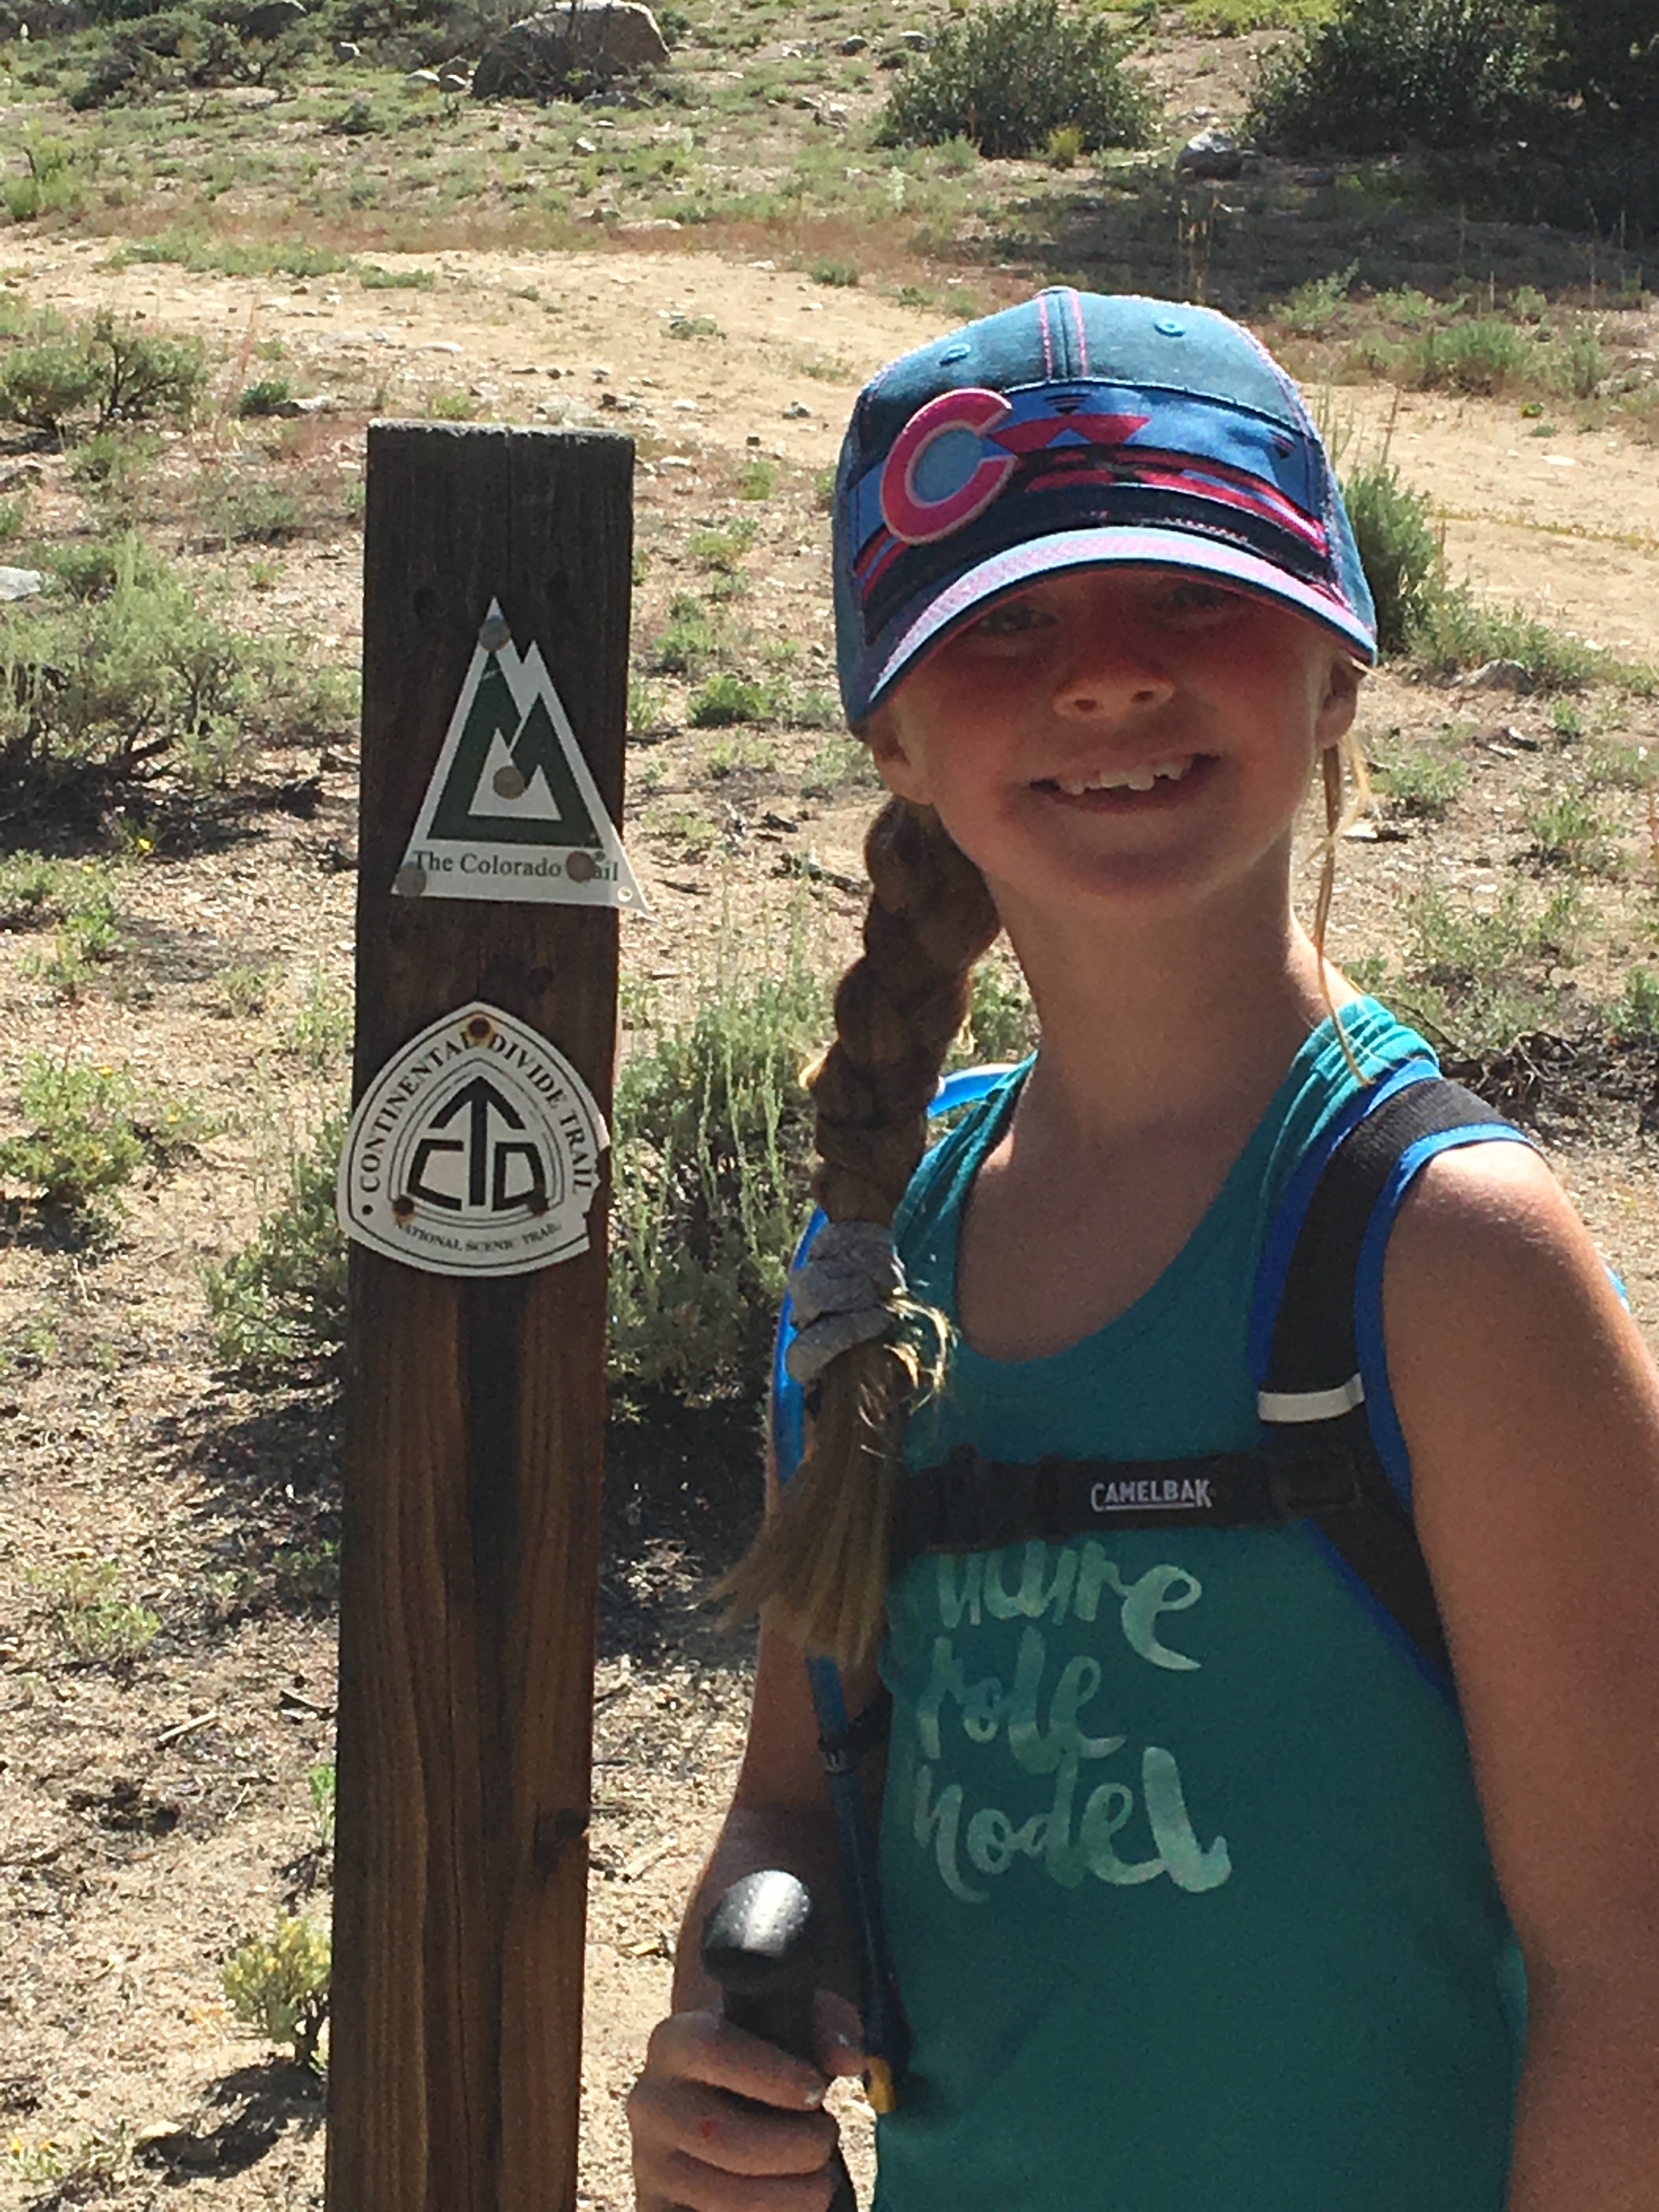 Lots of hiking opportunities on the Continental Divide Trail and the Colorado Trail nearby.